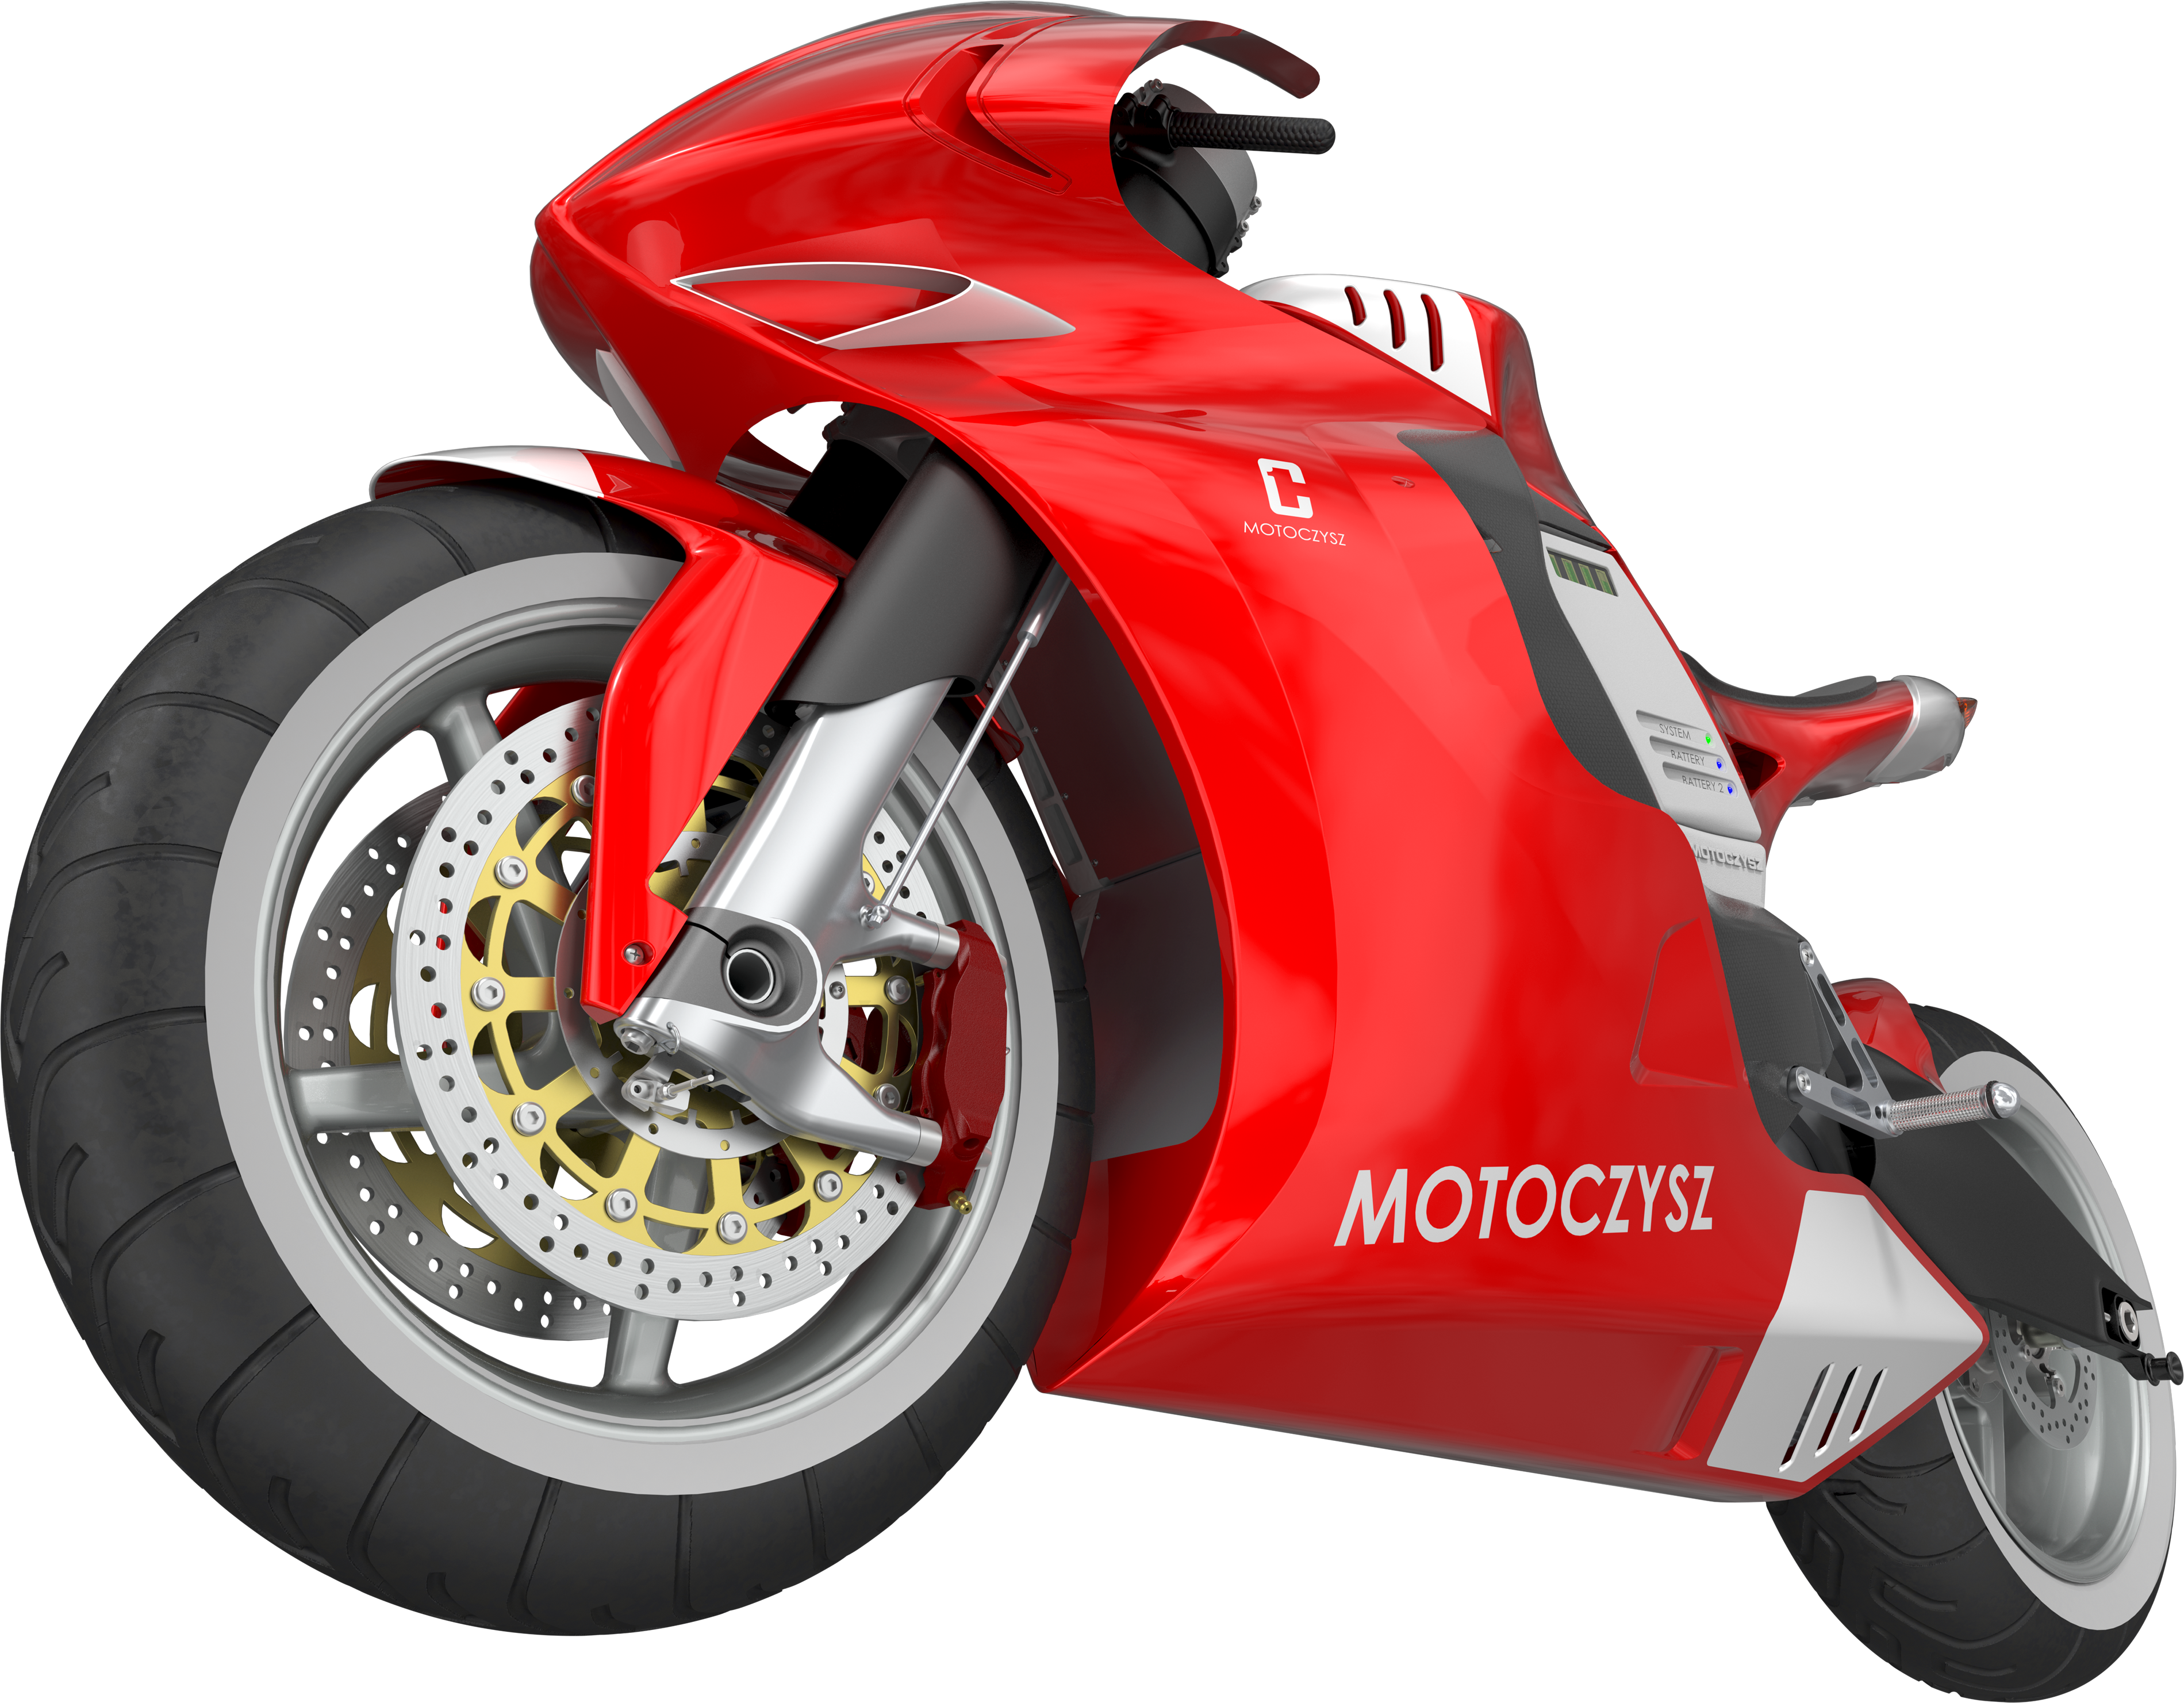 Red Moto Png Image, Motorcycle Png - Motorcycle, Transparent background PNG HD thumbnail